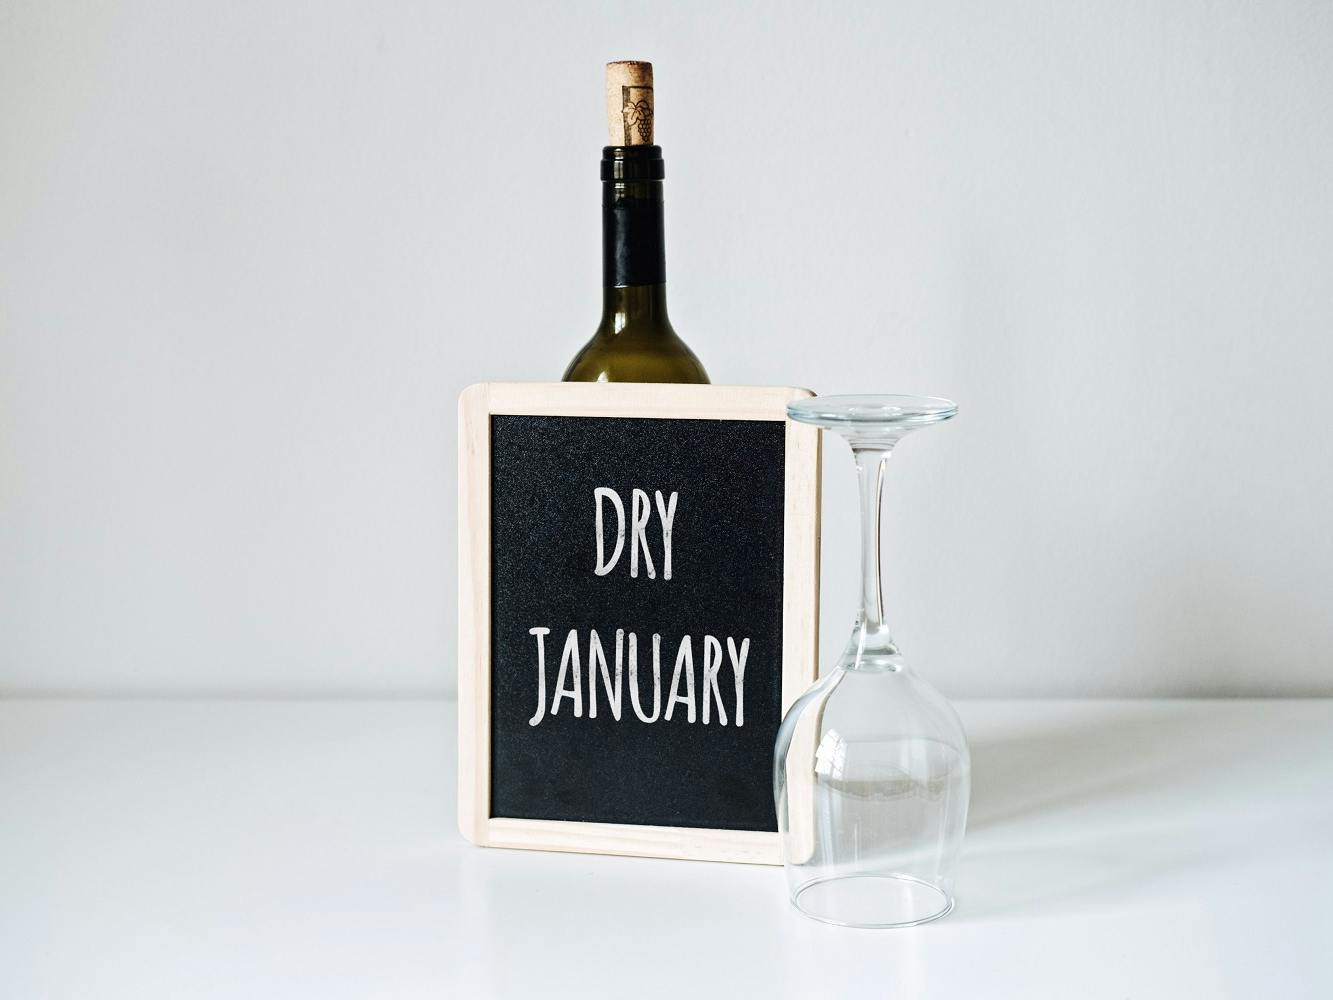 Want to Give Dry January a Try